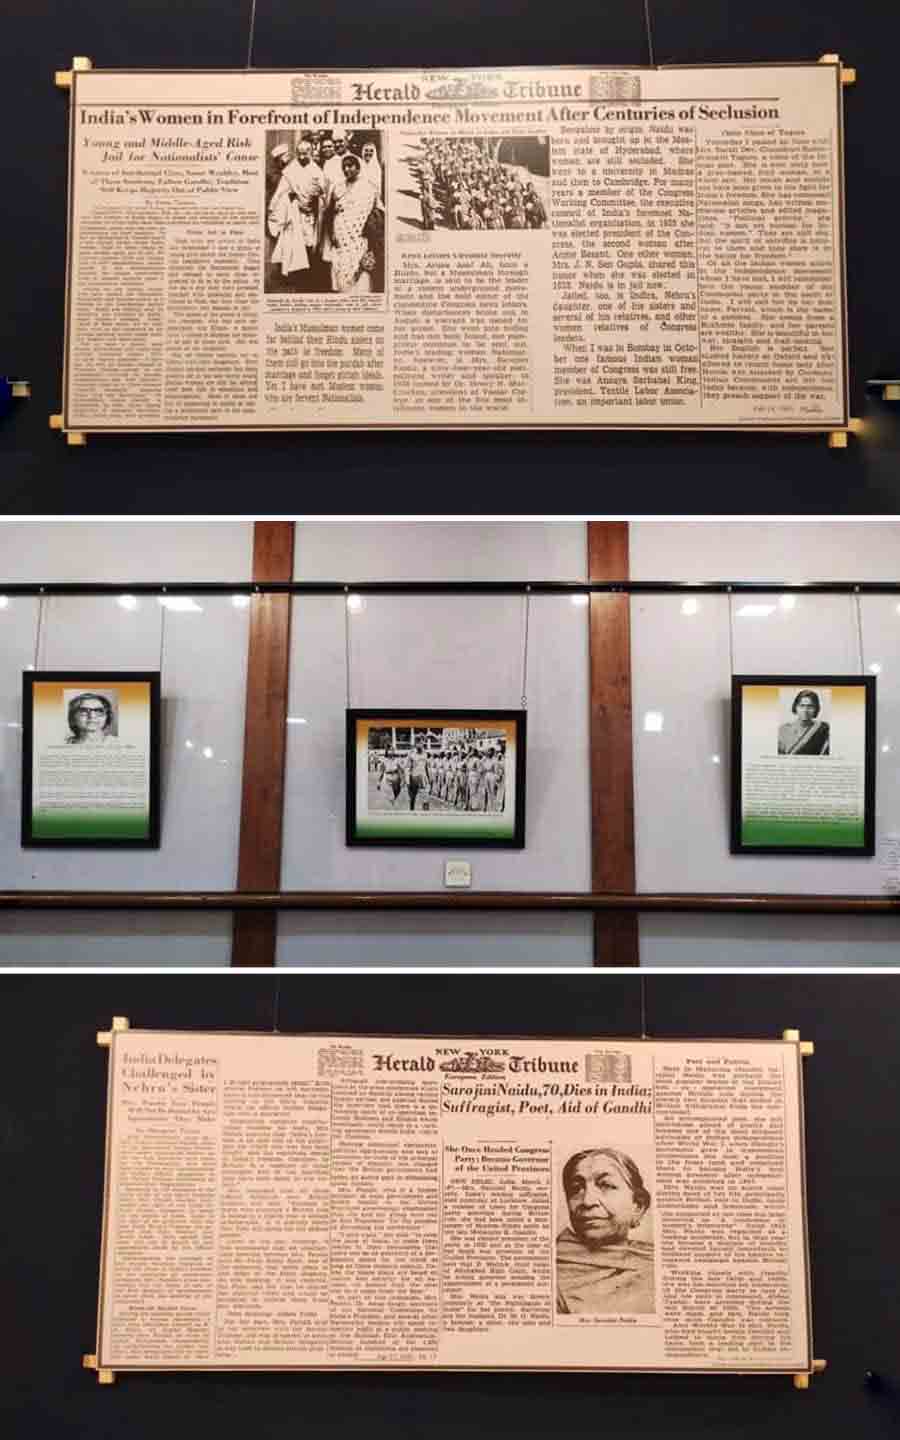 National Library has organised a book exhibition on “Women Freedom Fighters of India” between March 20 and April 18 at the Art Gallery of Bhasha Bhawan  